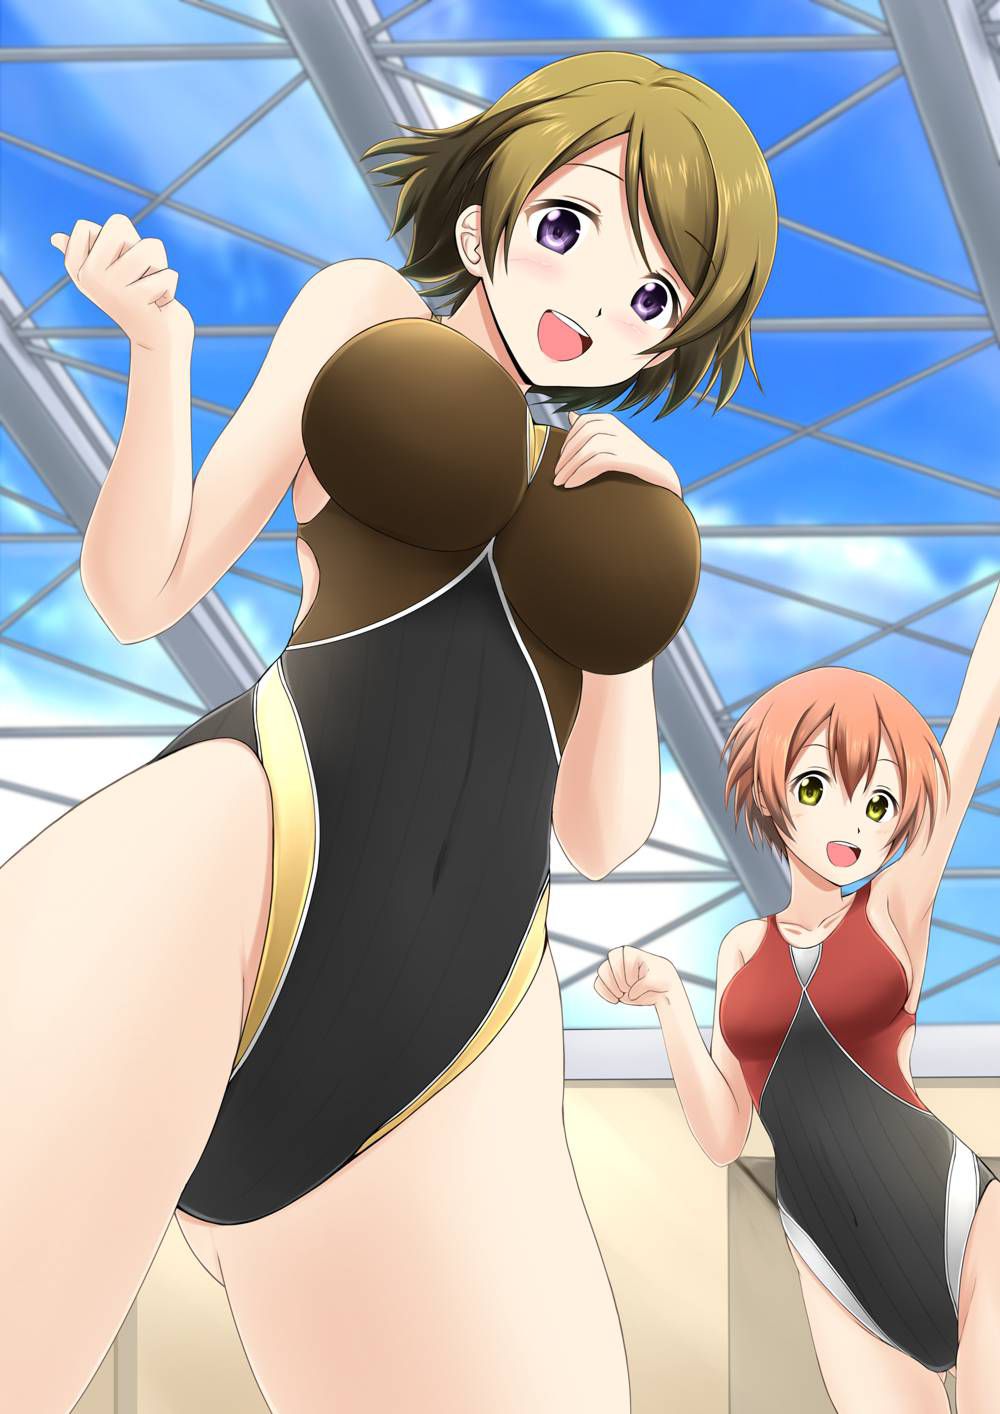 It comes more than a usual swimsuit! Second erotic image of the girl in the swimsuit wwww Part 5 12